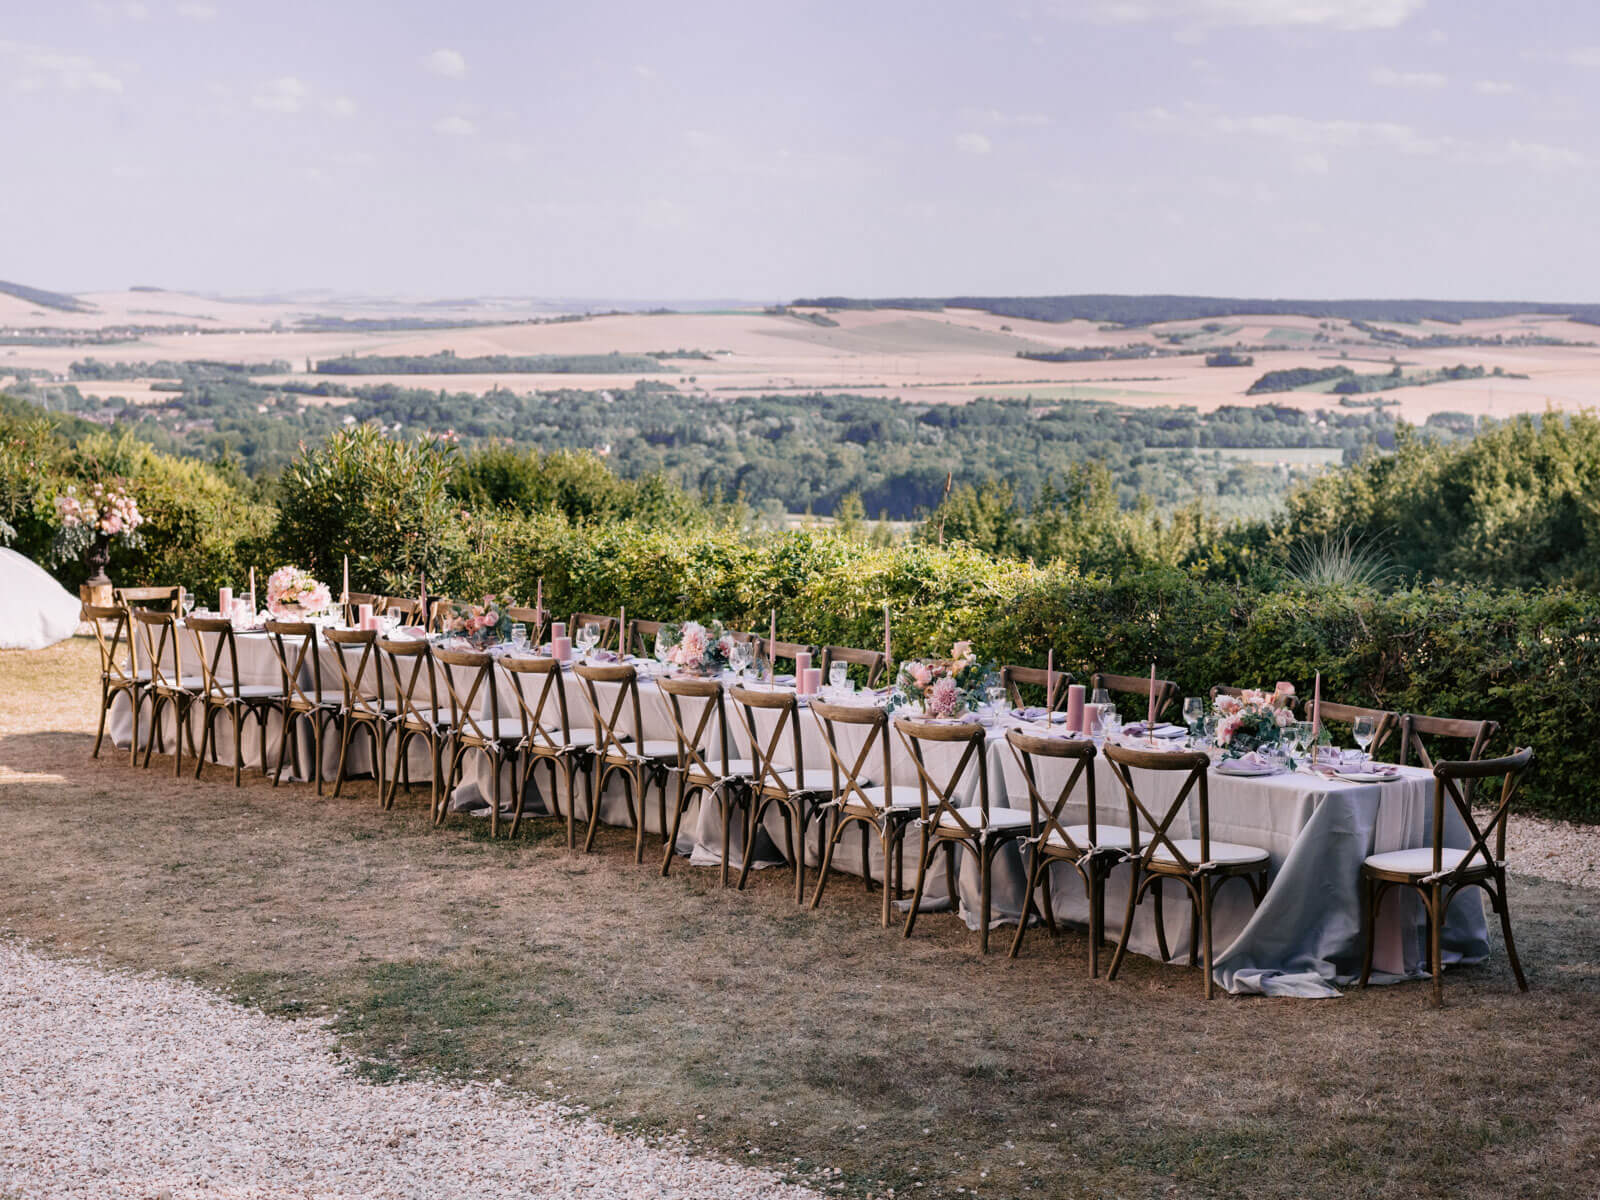 A rustic long dinner table outdoors, overlooking the estate in France. Image by Destination Wedding Photographer Jenny Fu